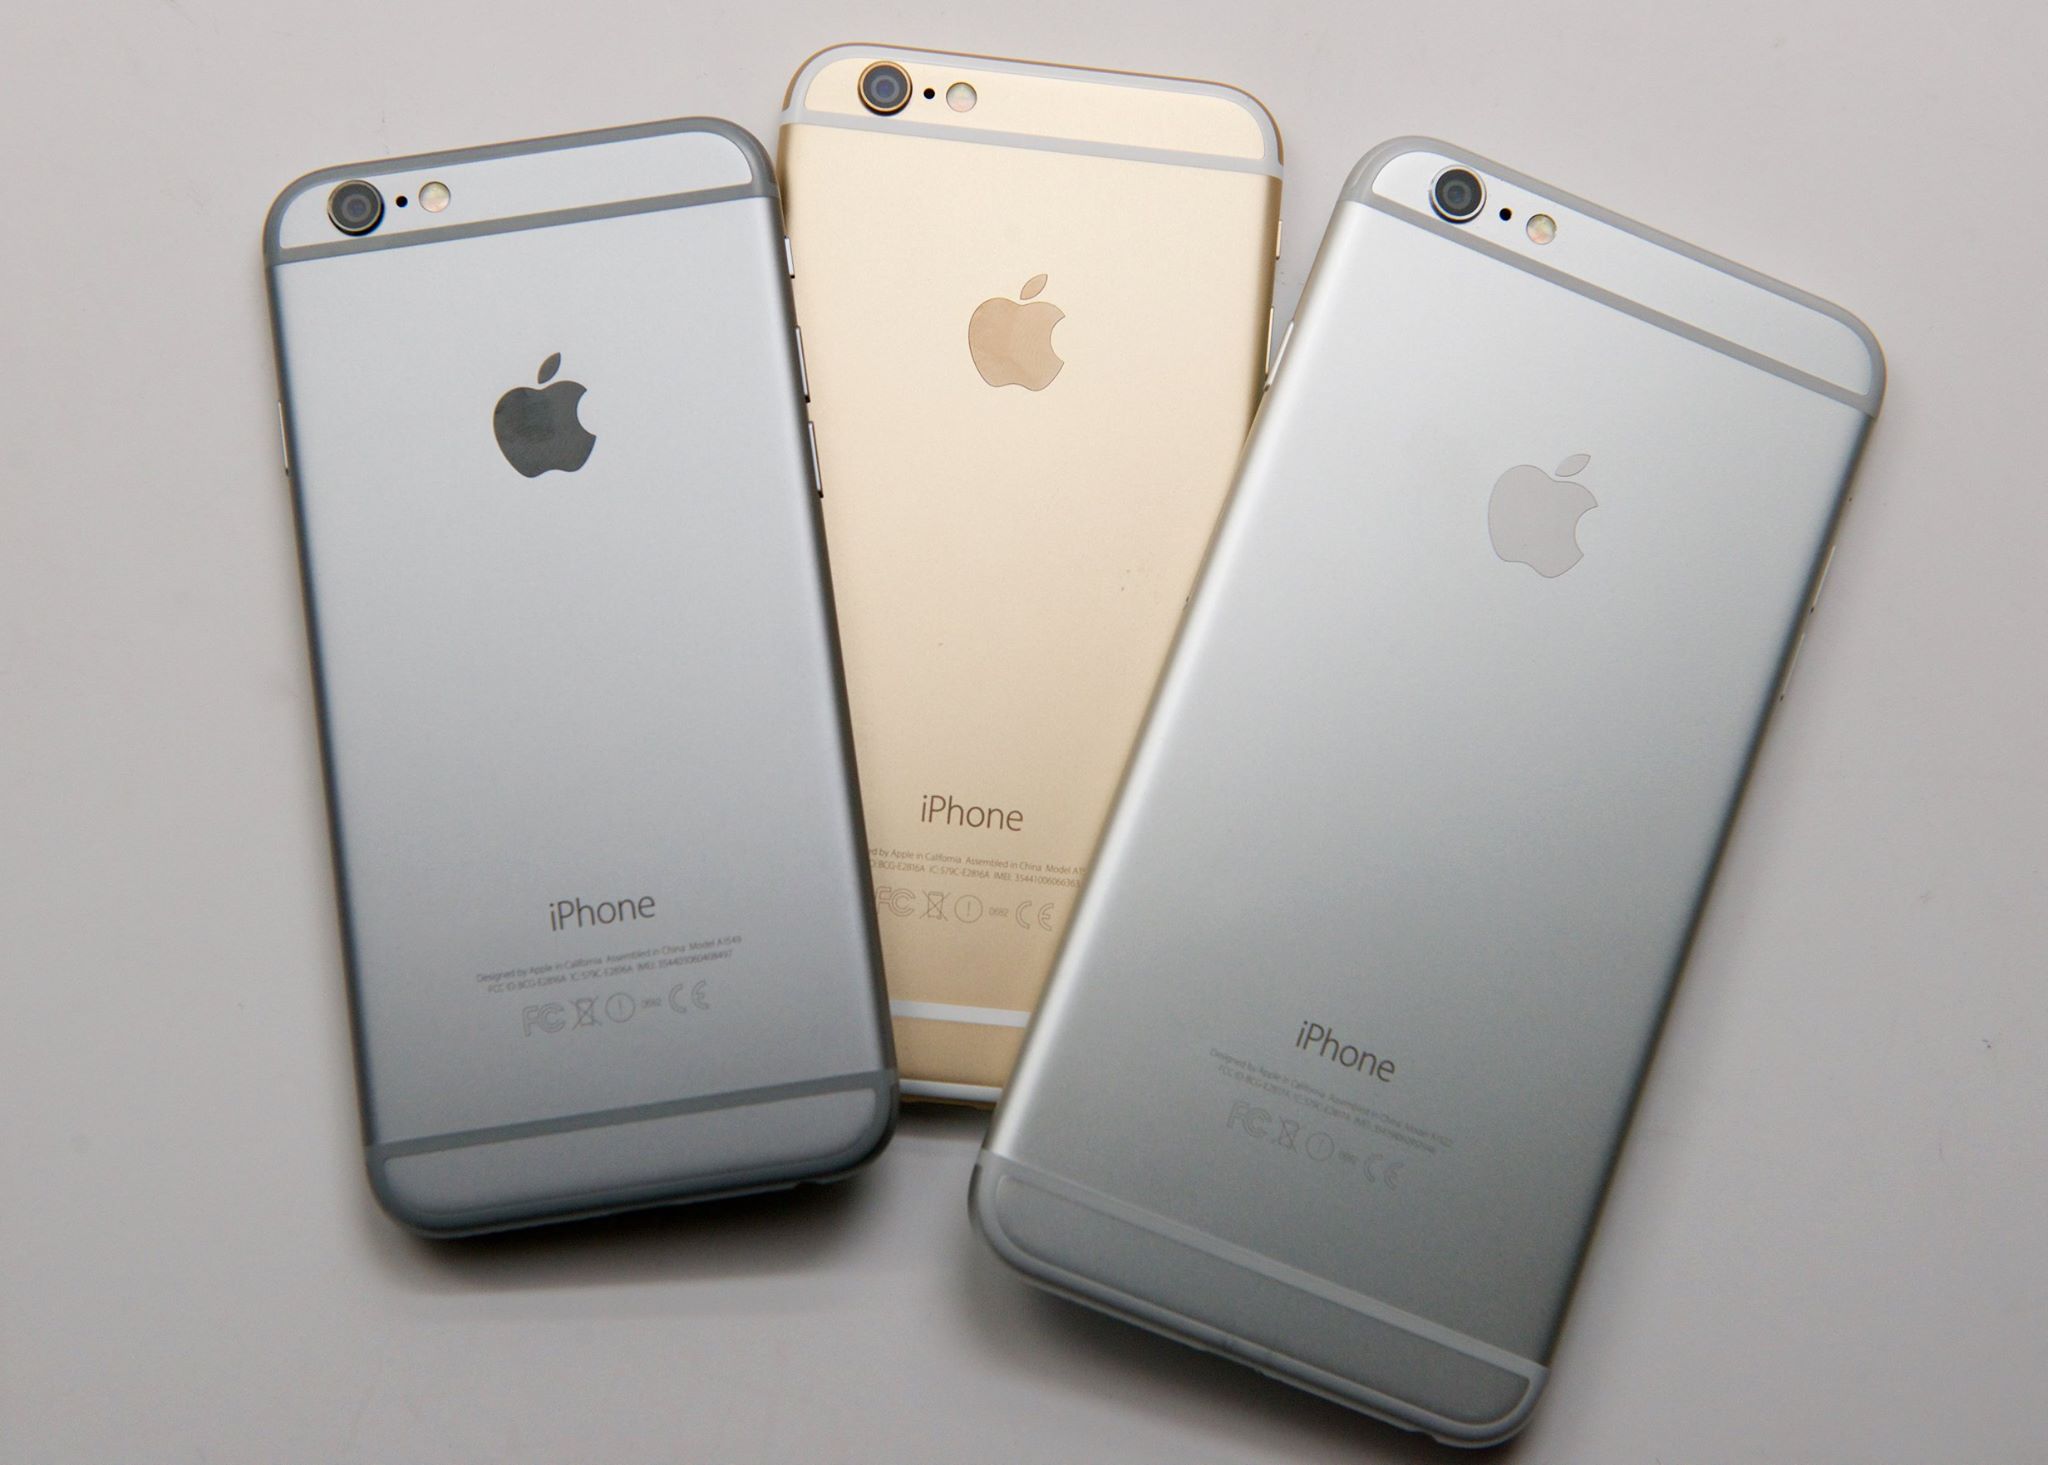 Find out which iPhone you should buy.